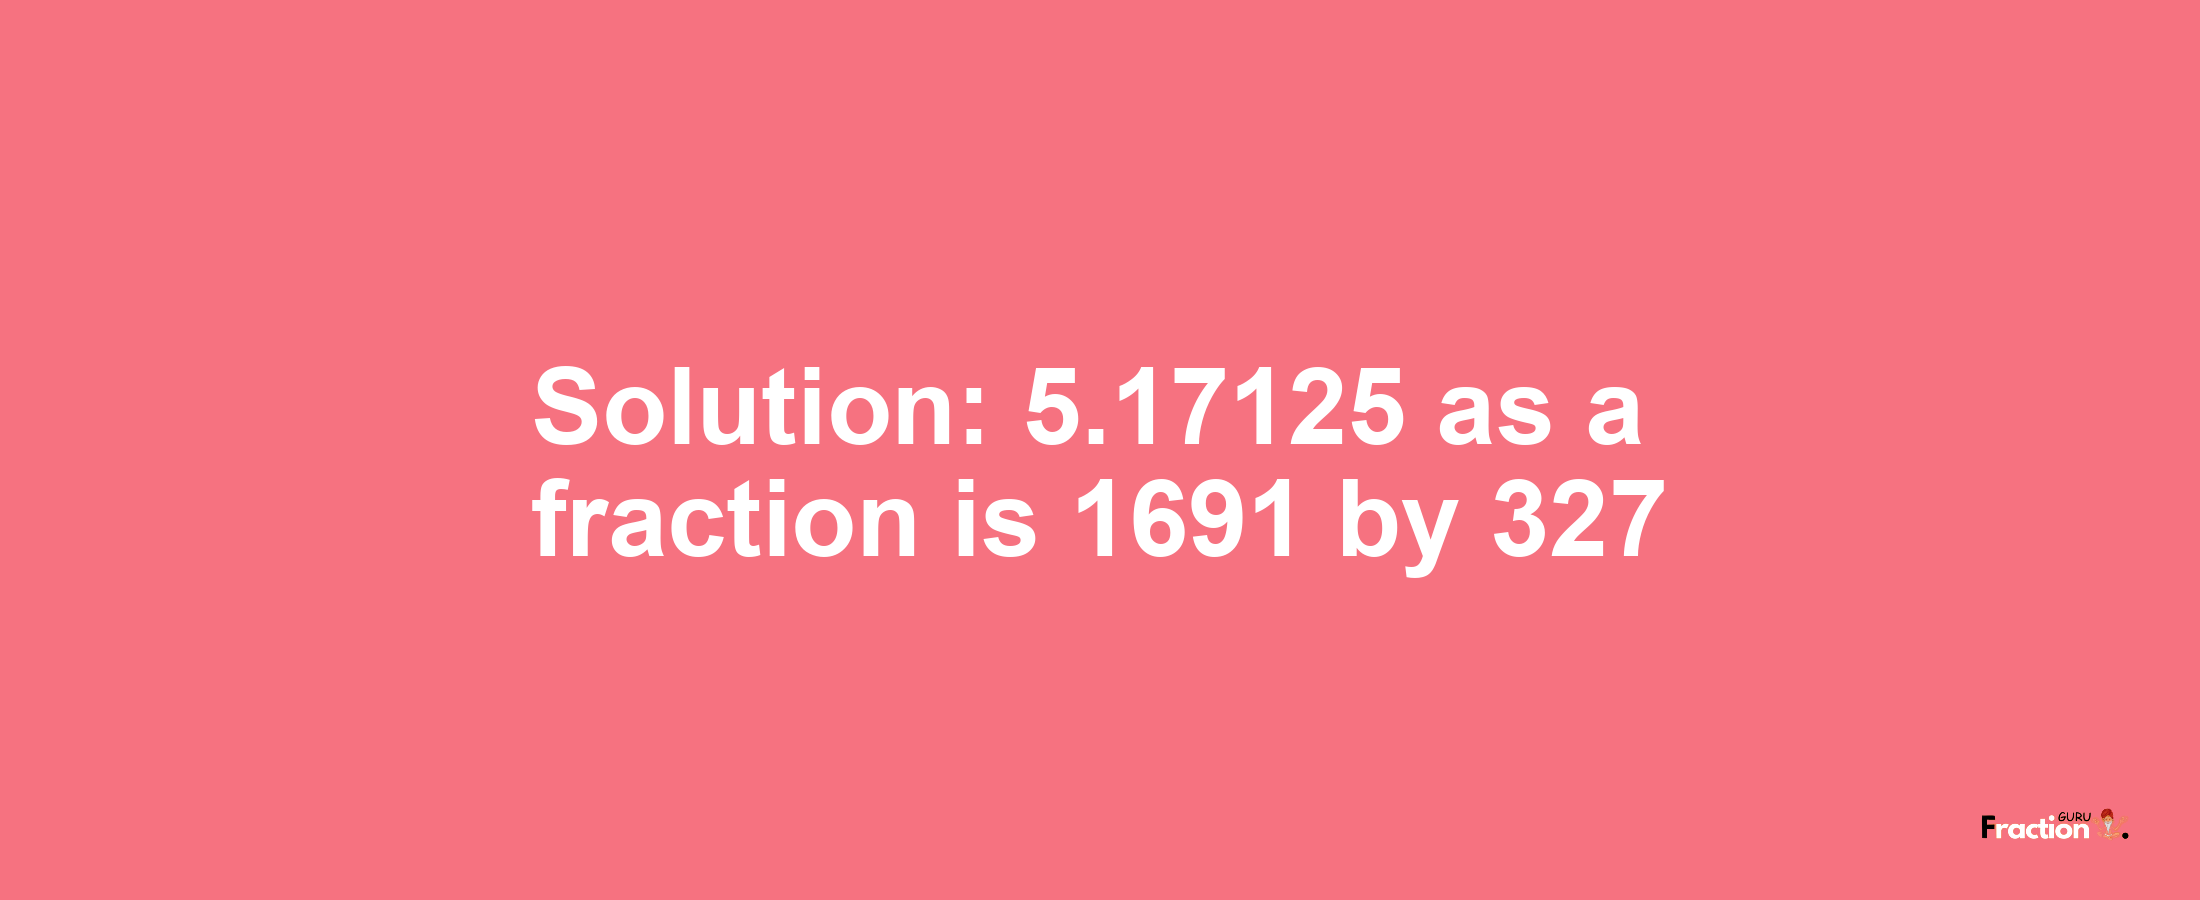 Solution:5.17125 as a fraction is 1691/327